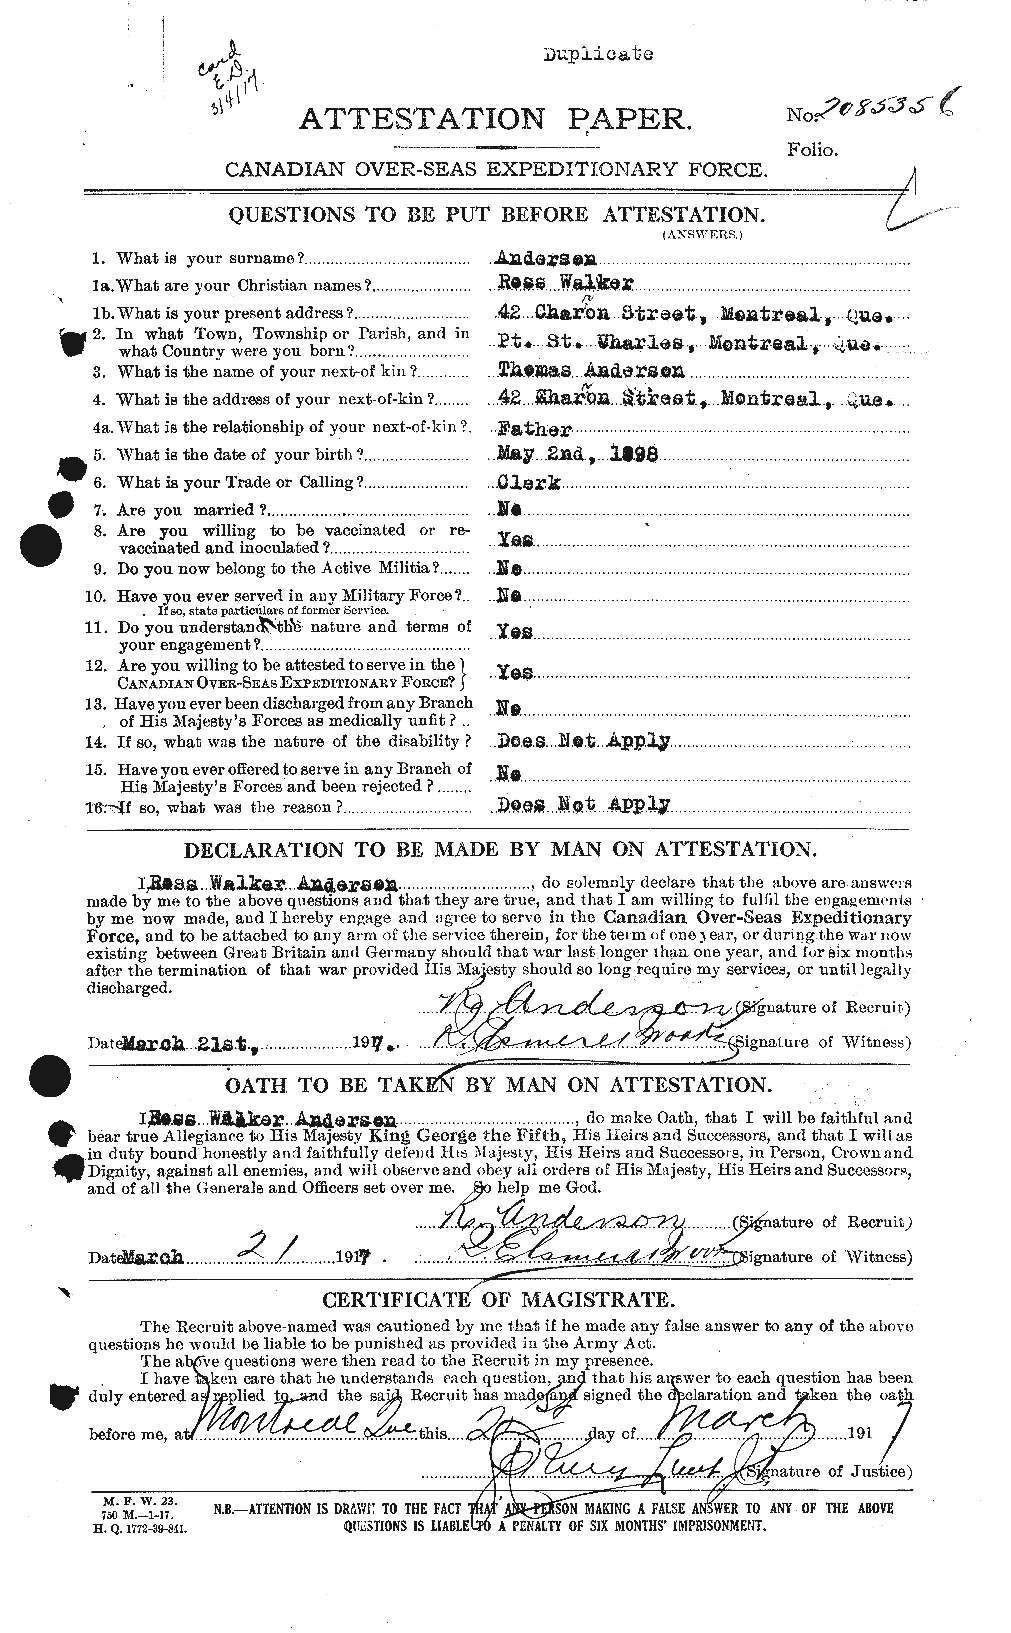 Personnel Records of the First World War - CEF 207203a